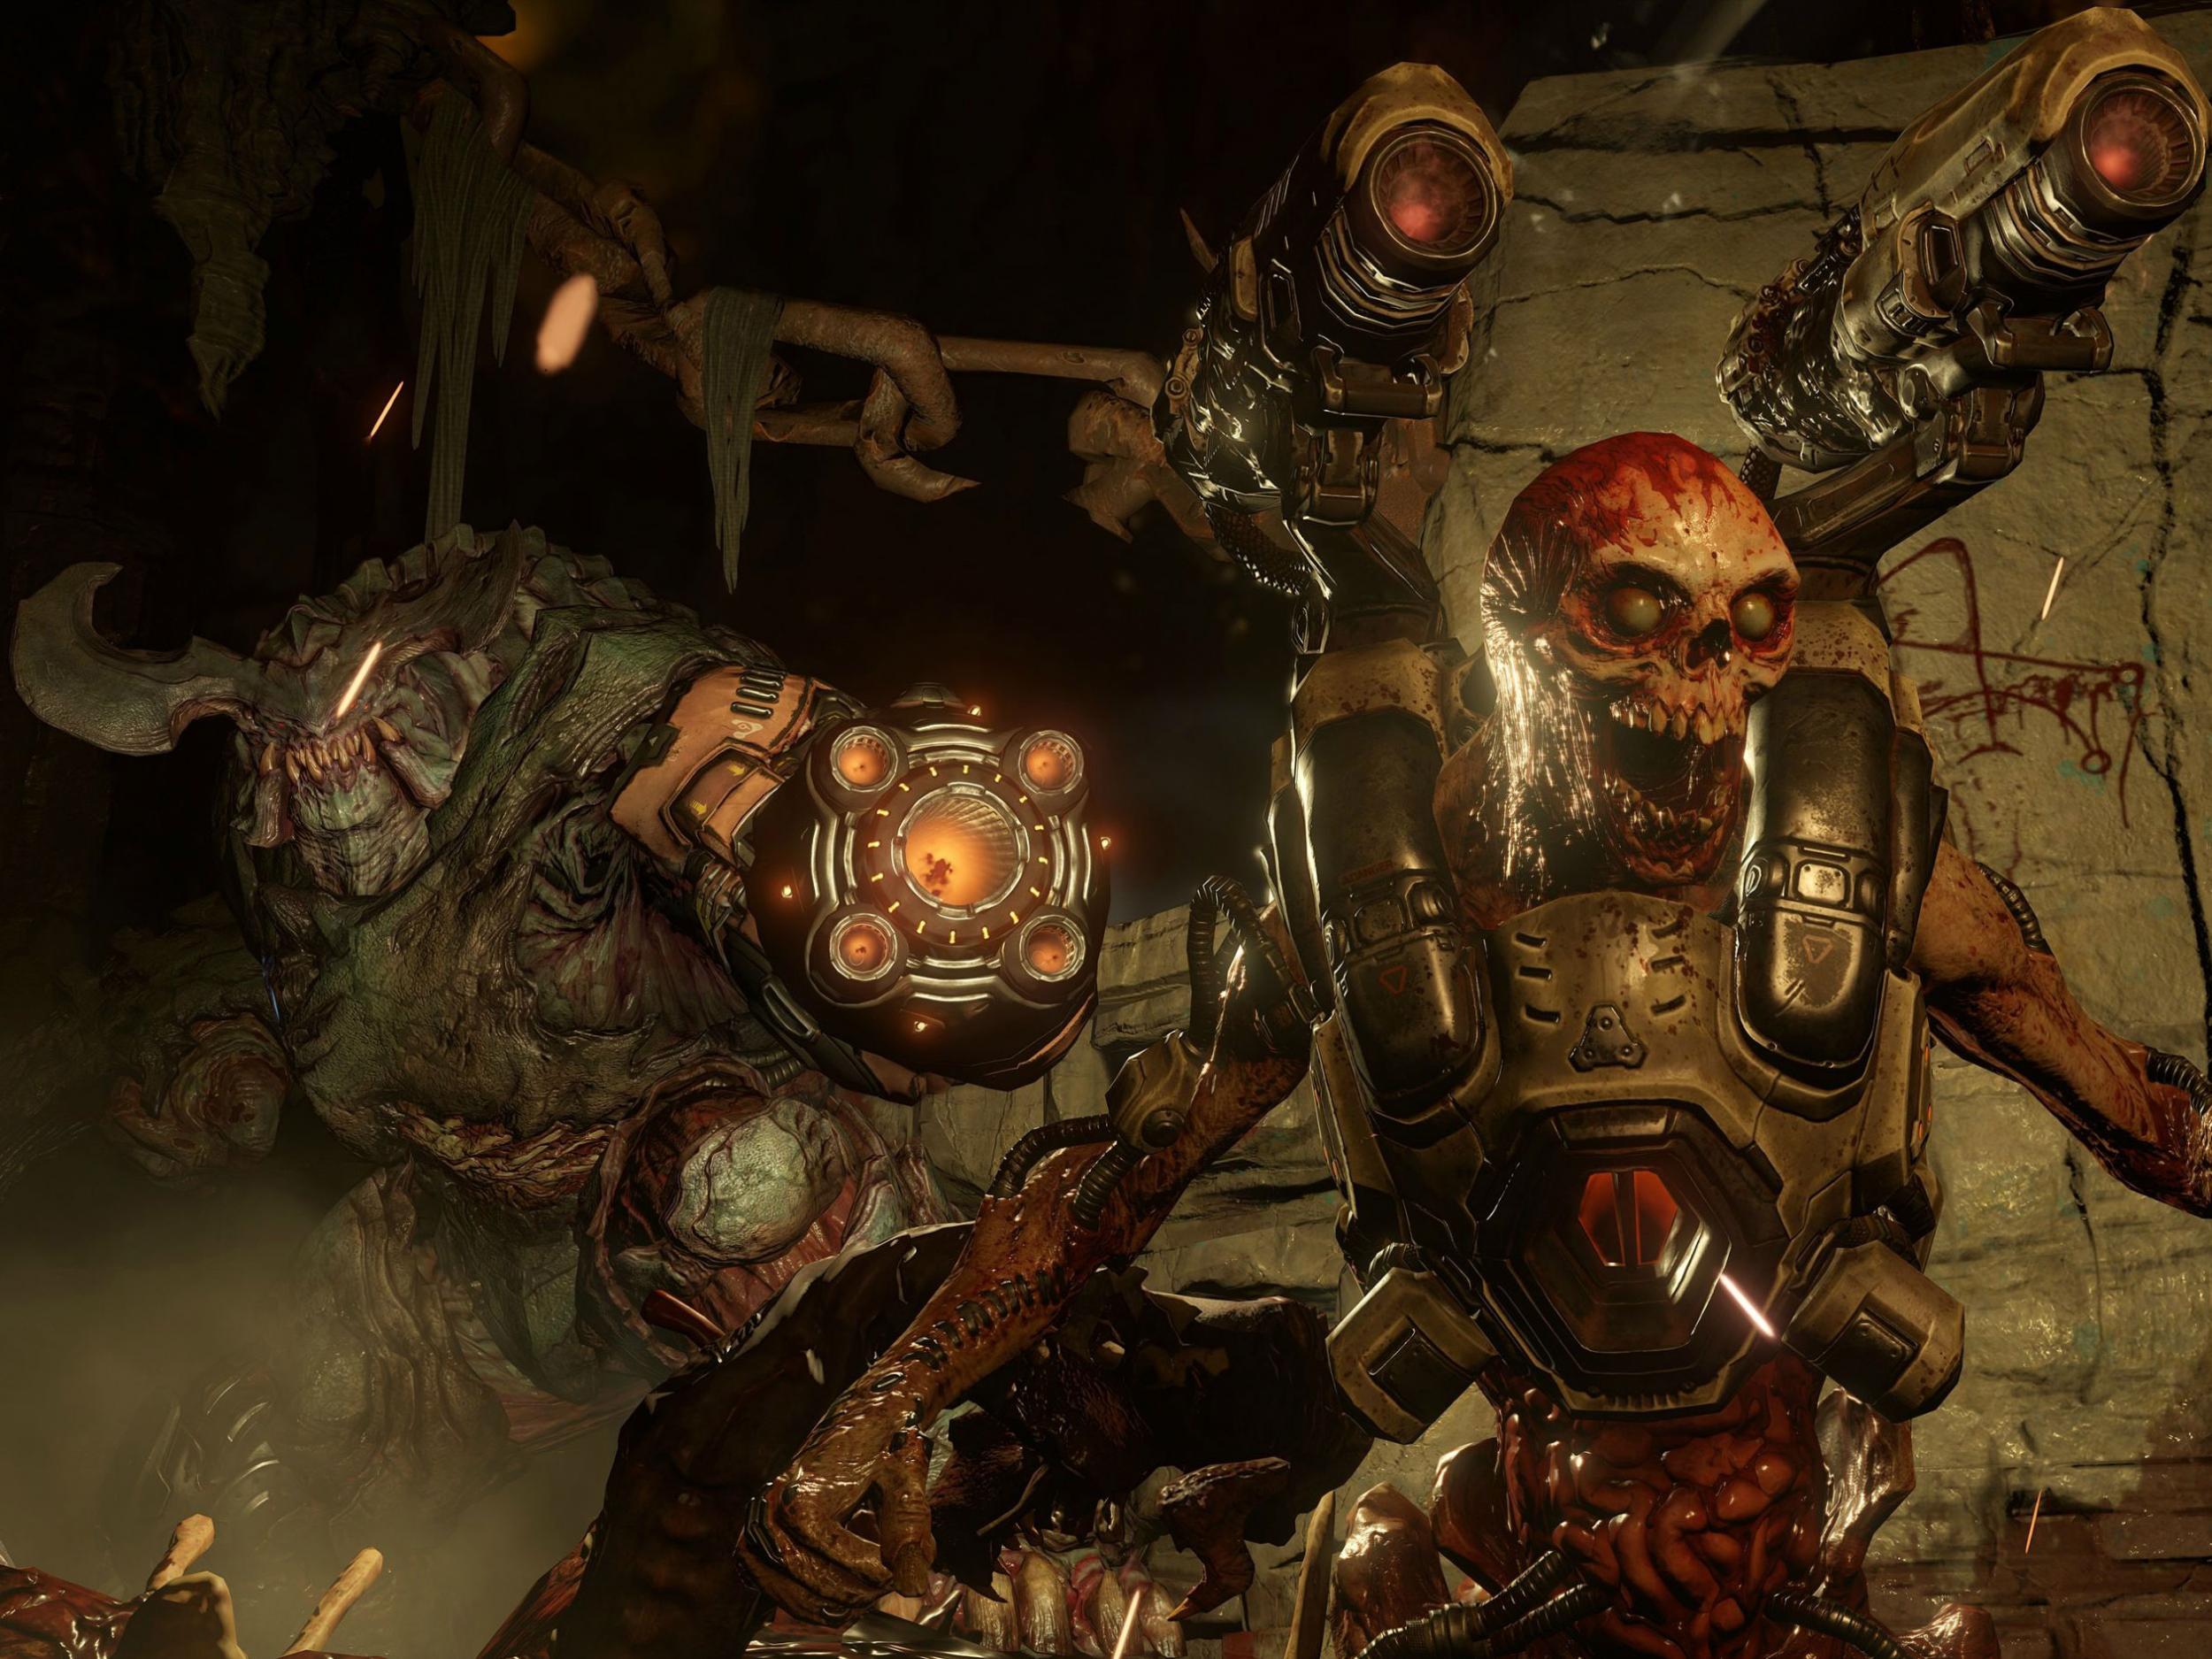 Doom will mainly appeal to existing fans but is such a fast, fun, bloody shooter it should also attract some new enthusiasts